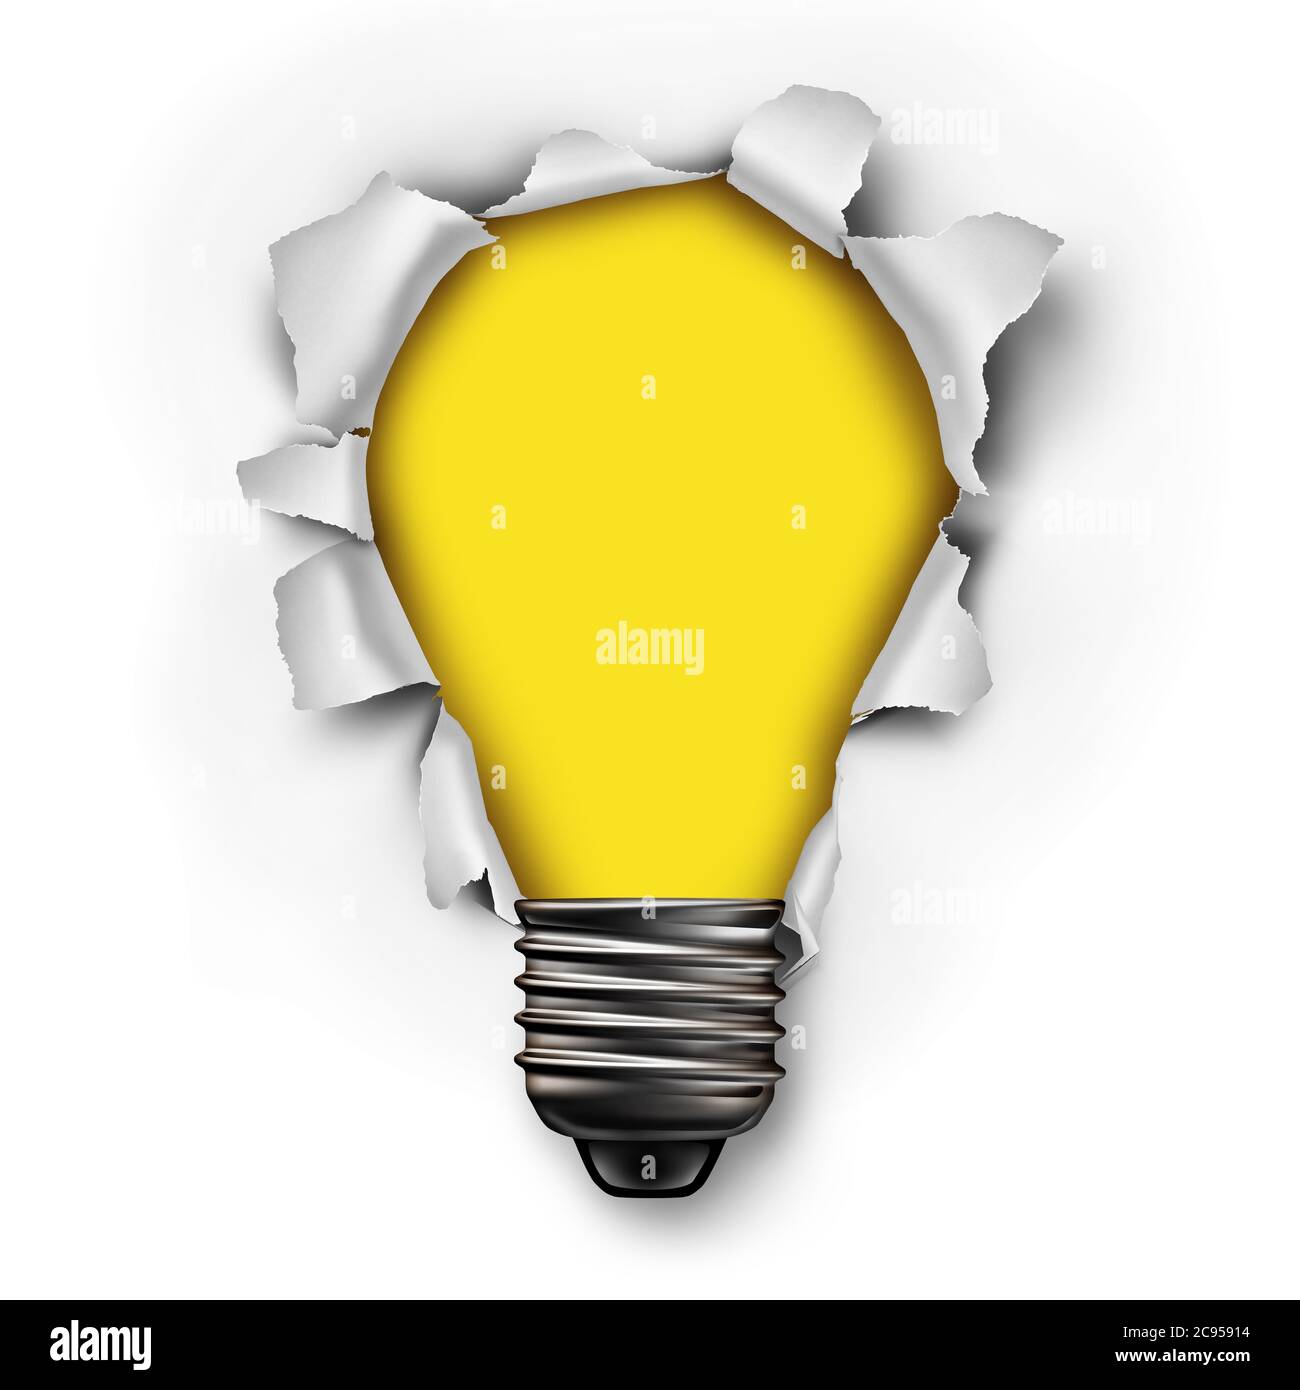 Idea concept as a creative symbol for innovation with 3D illustration elements. Stock Photo